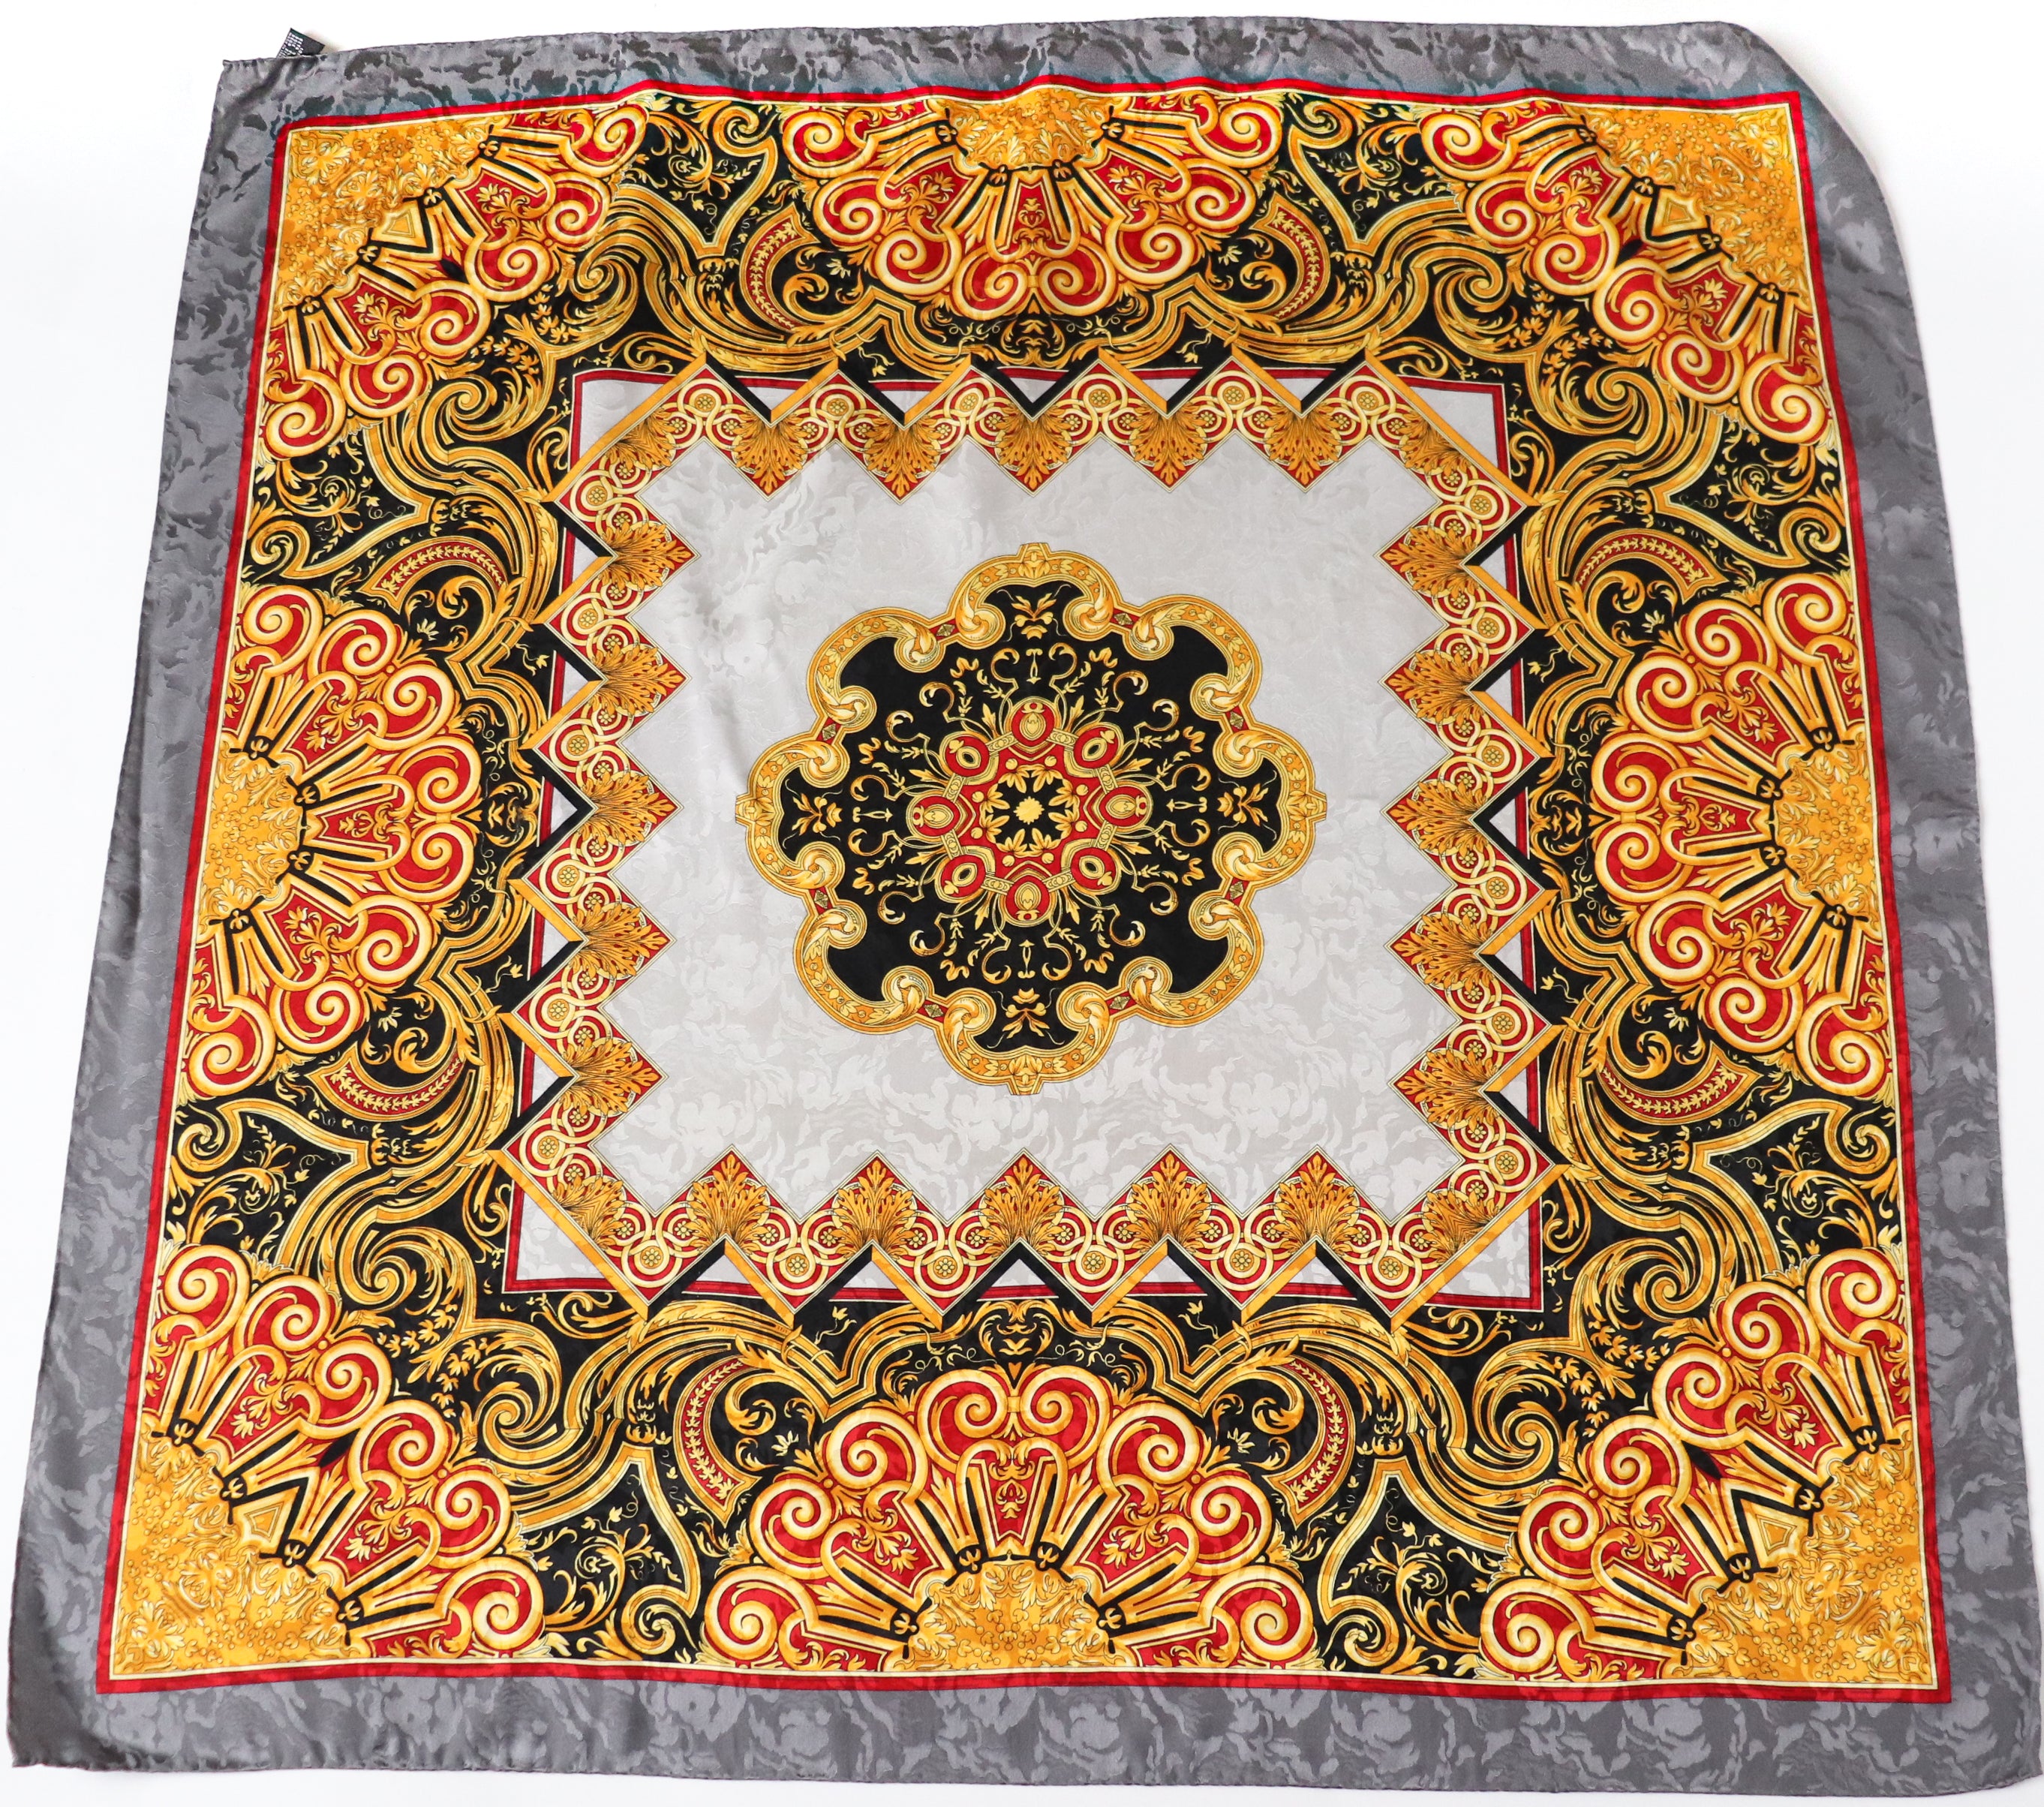 Baroque Vintage Silk Scarf - Grey / Red / Gold  90 x 90  -  LARGE